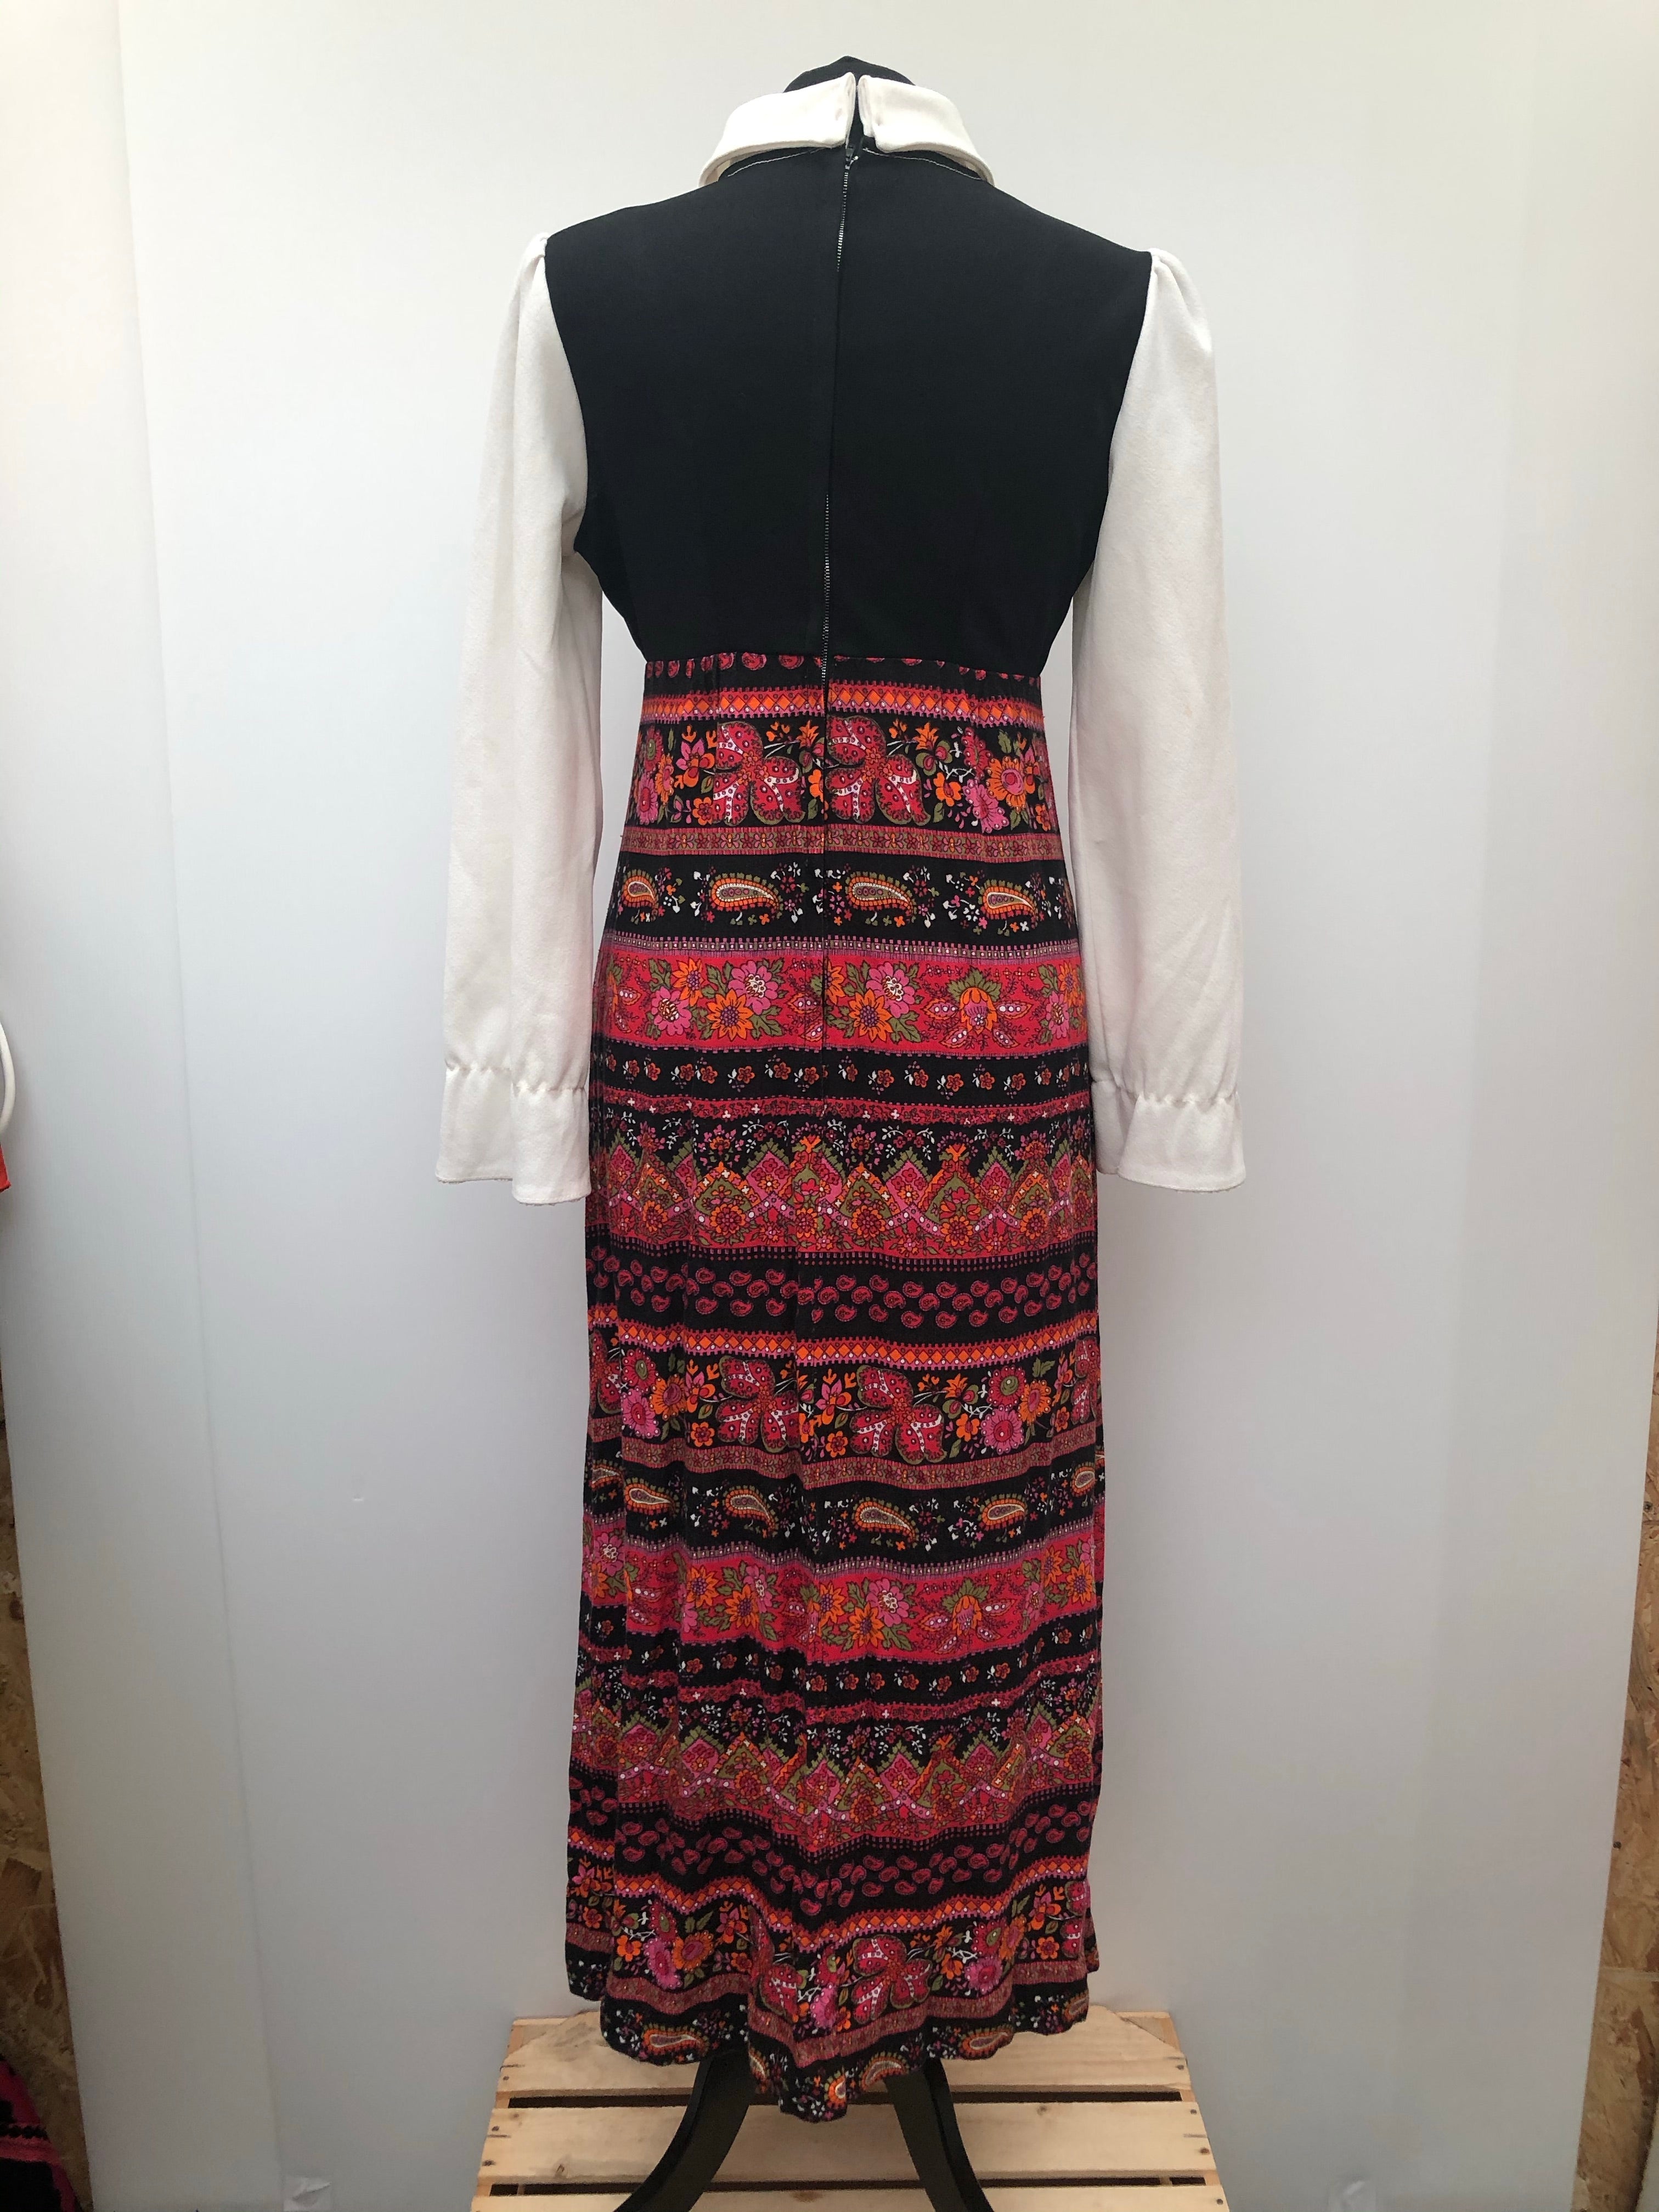 1960s / 1970s Collared and Floral Patterned Maxi Dress - Size 12